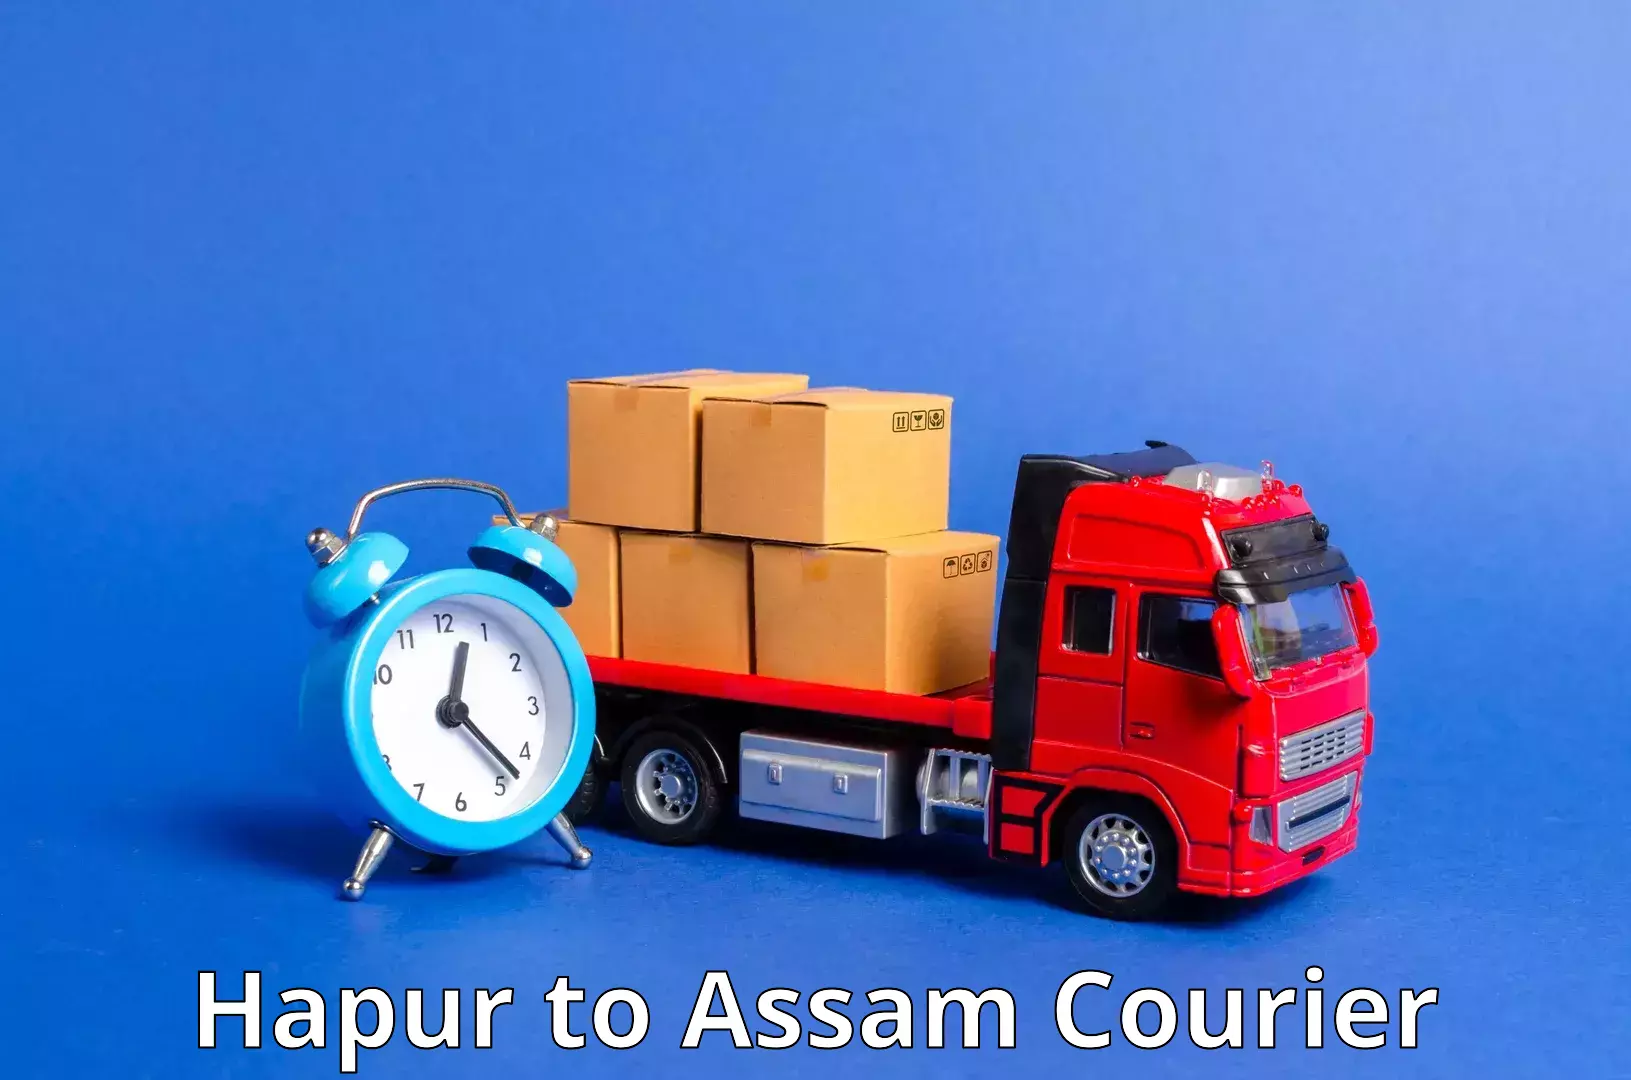 Specialized shipment handling Hapur to Assam